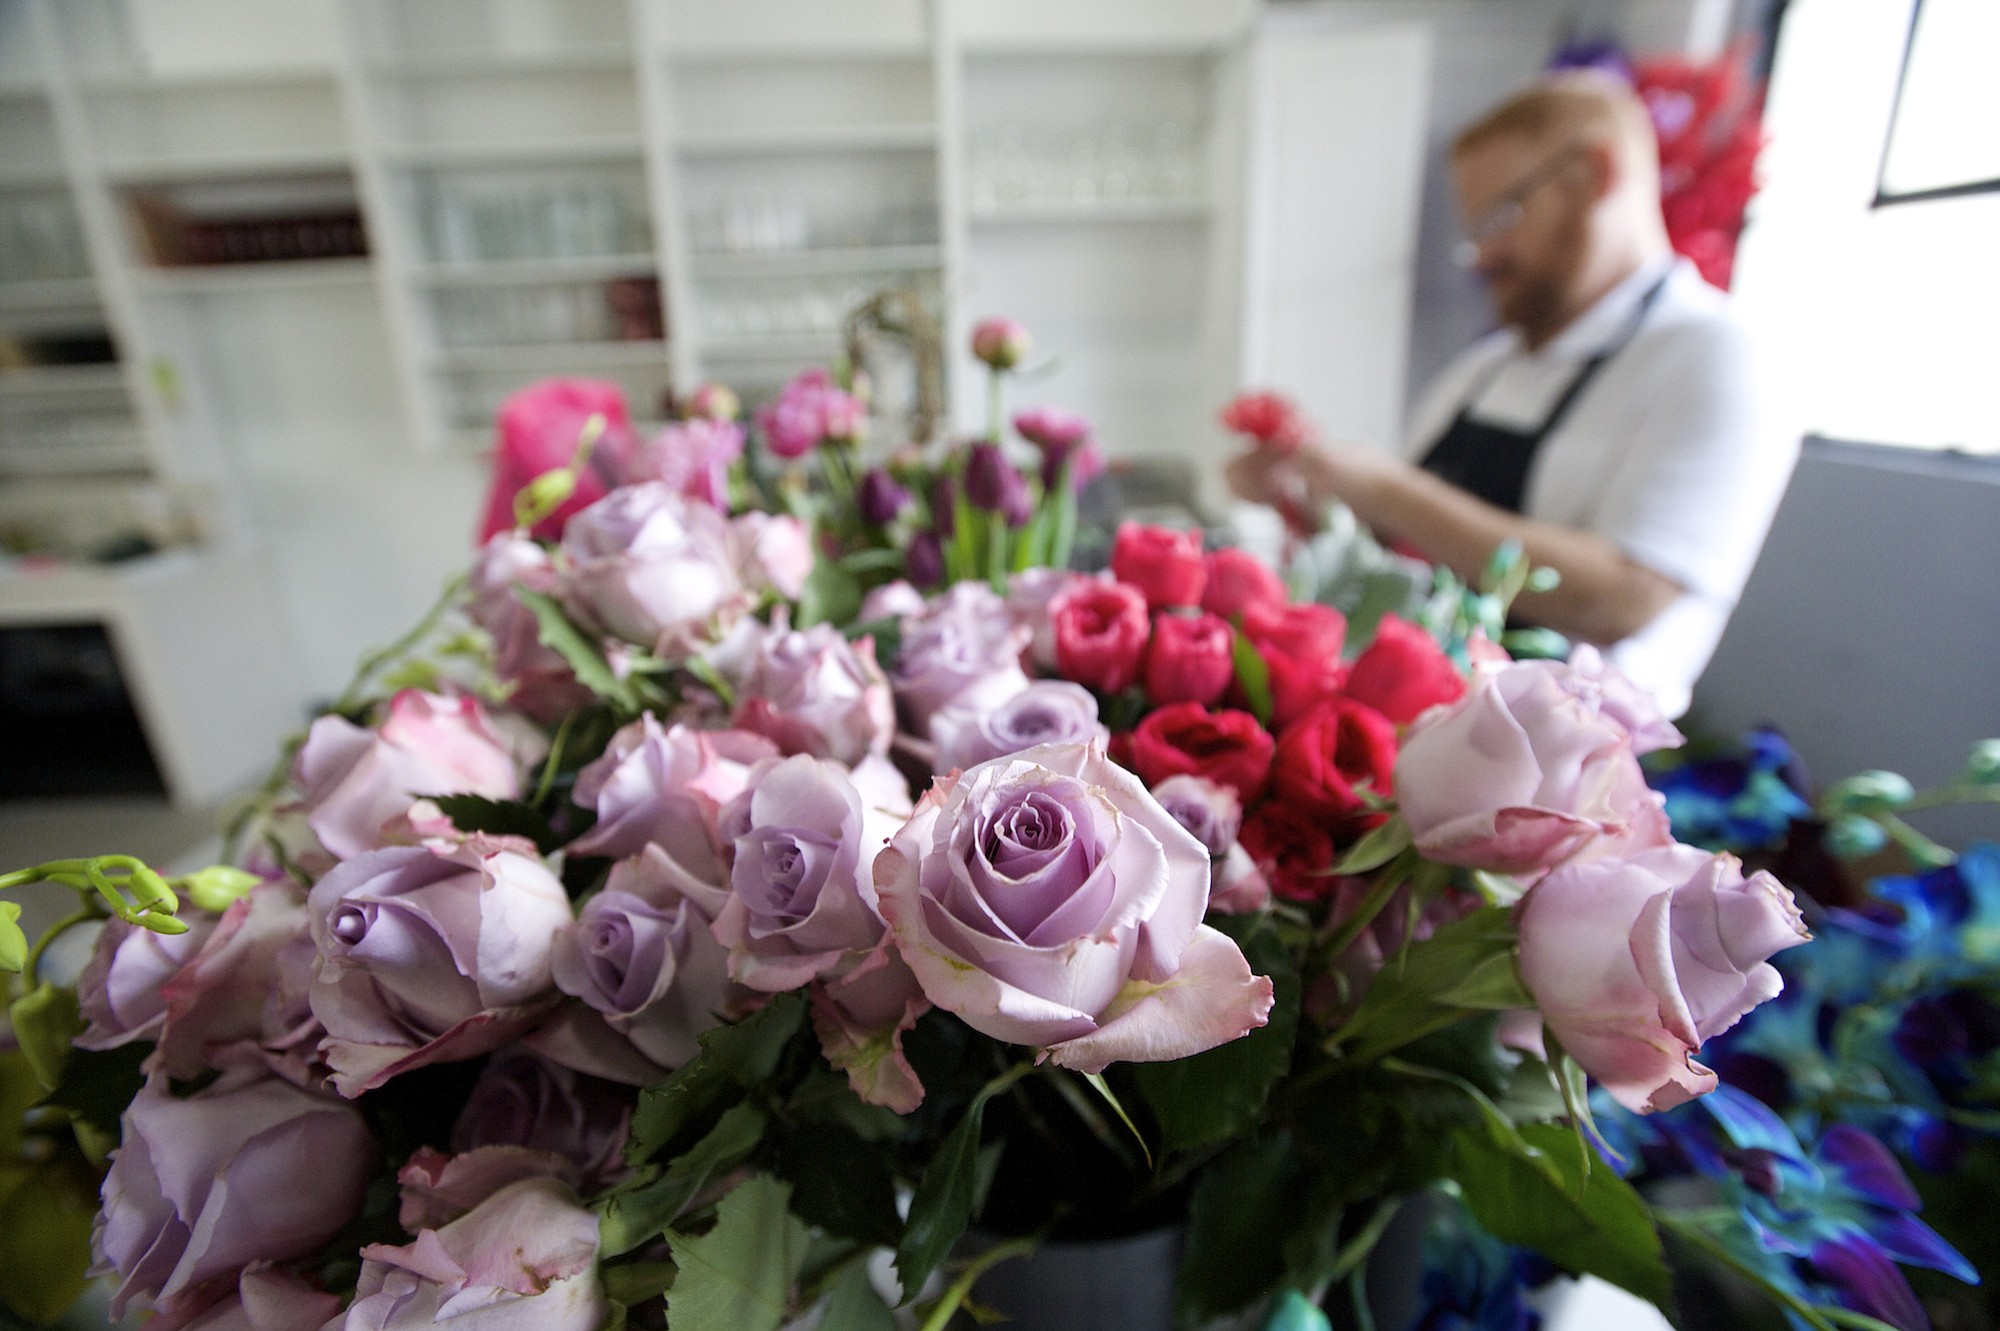 Photos by Steven Lane/The Columbian
Bruno Amicci has opened a new shop, Luepke Flowers